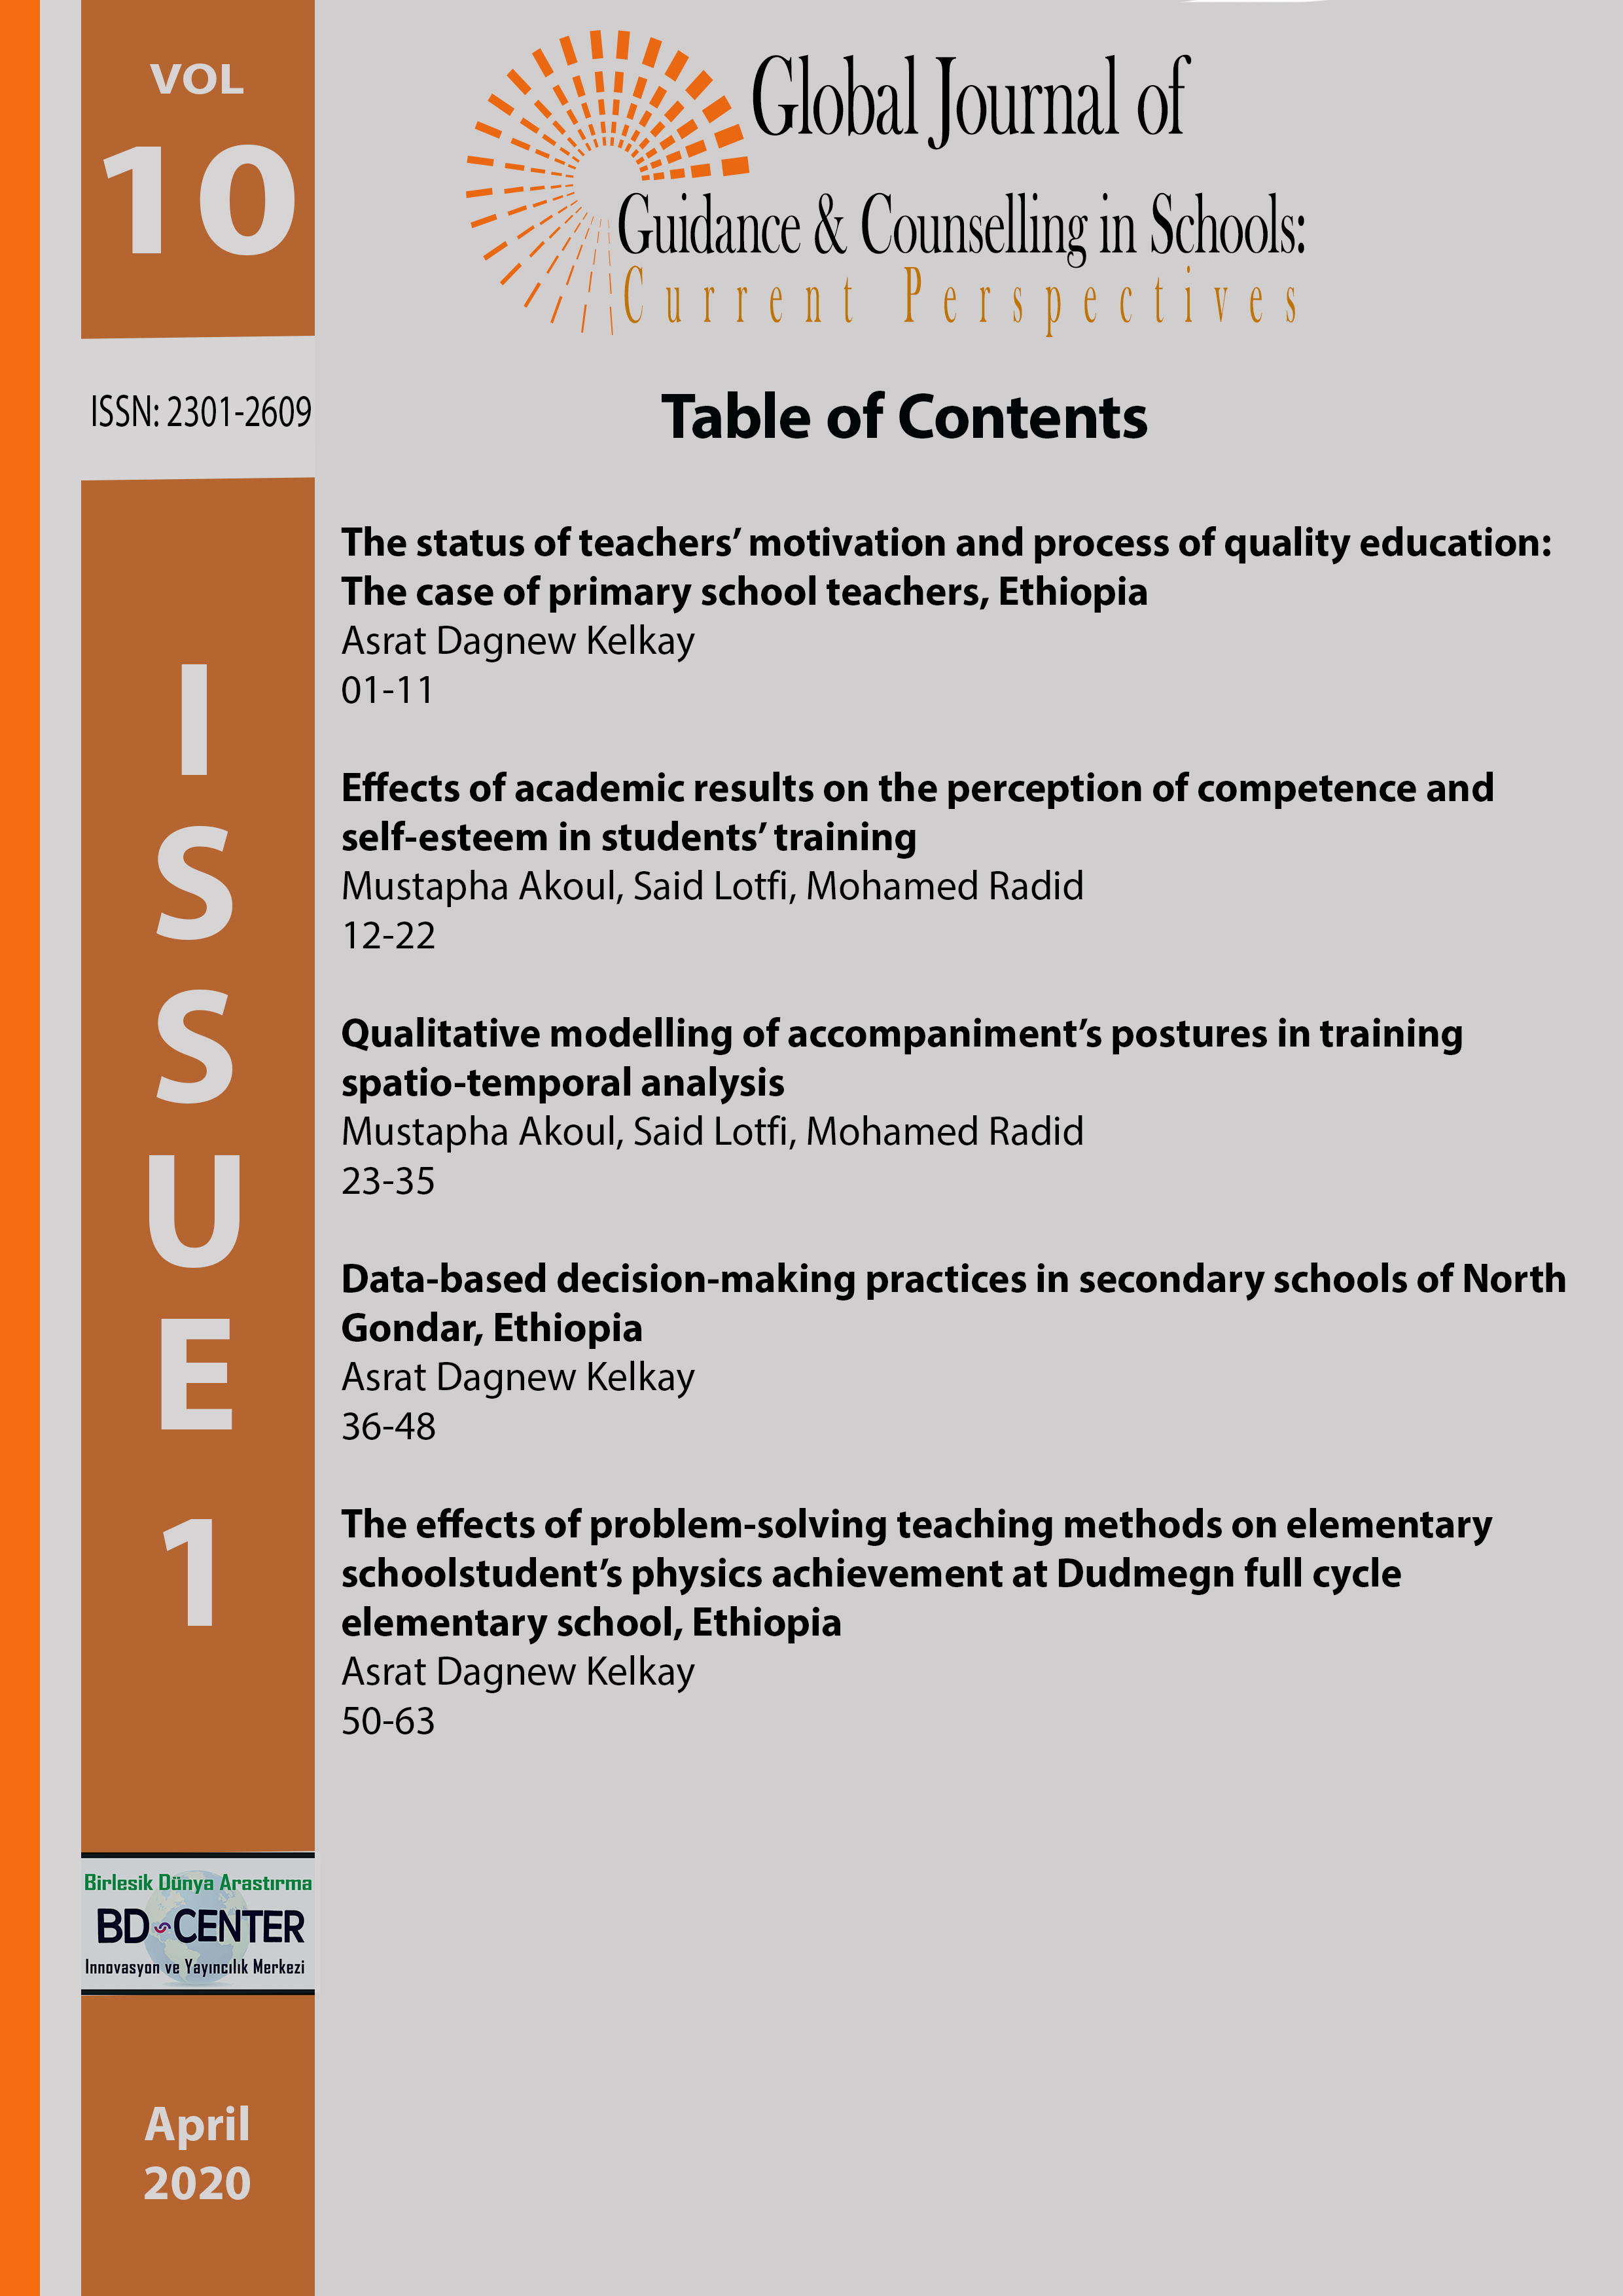 Global Journal of Guidance and Counseling in Schools: Current Perspectives